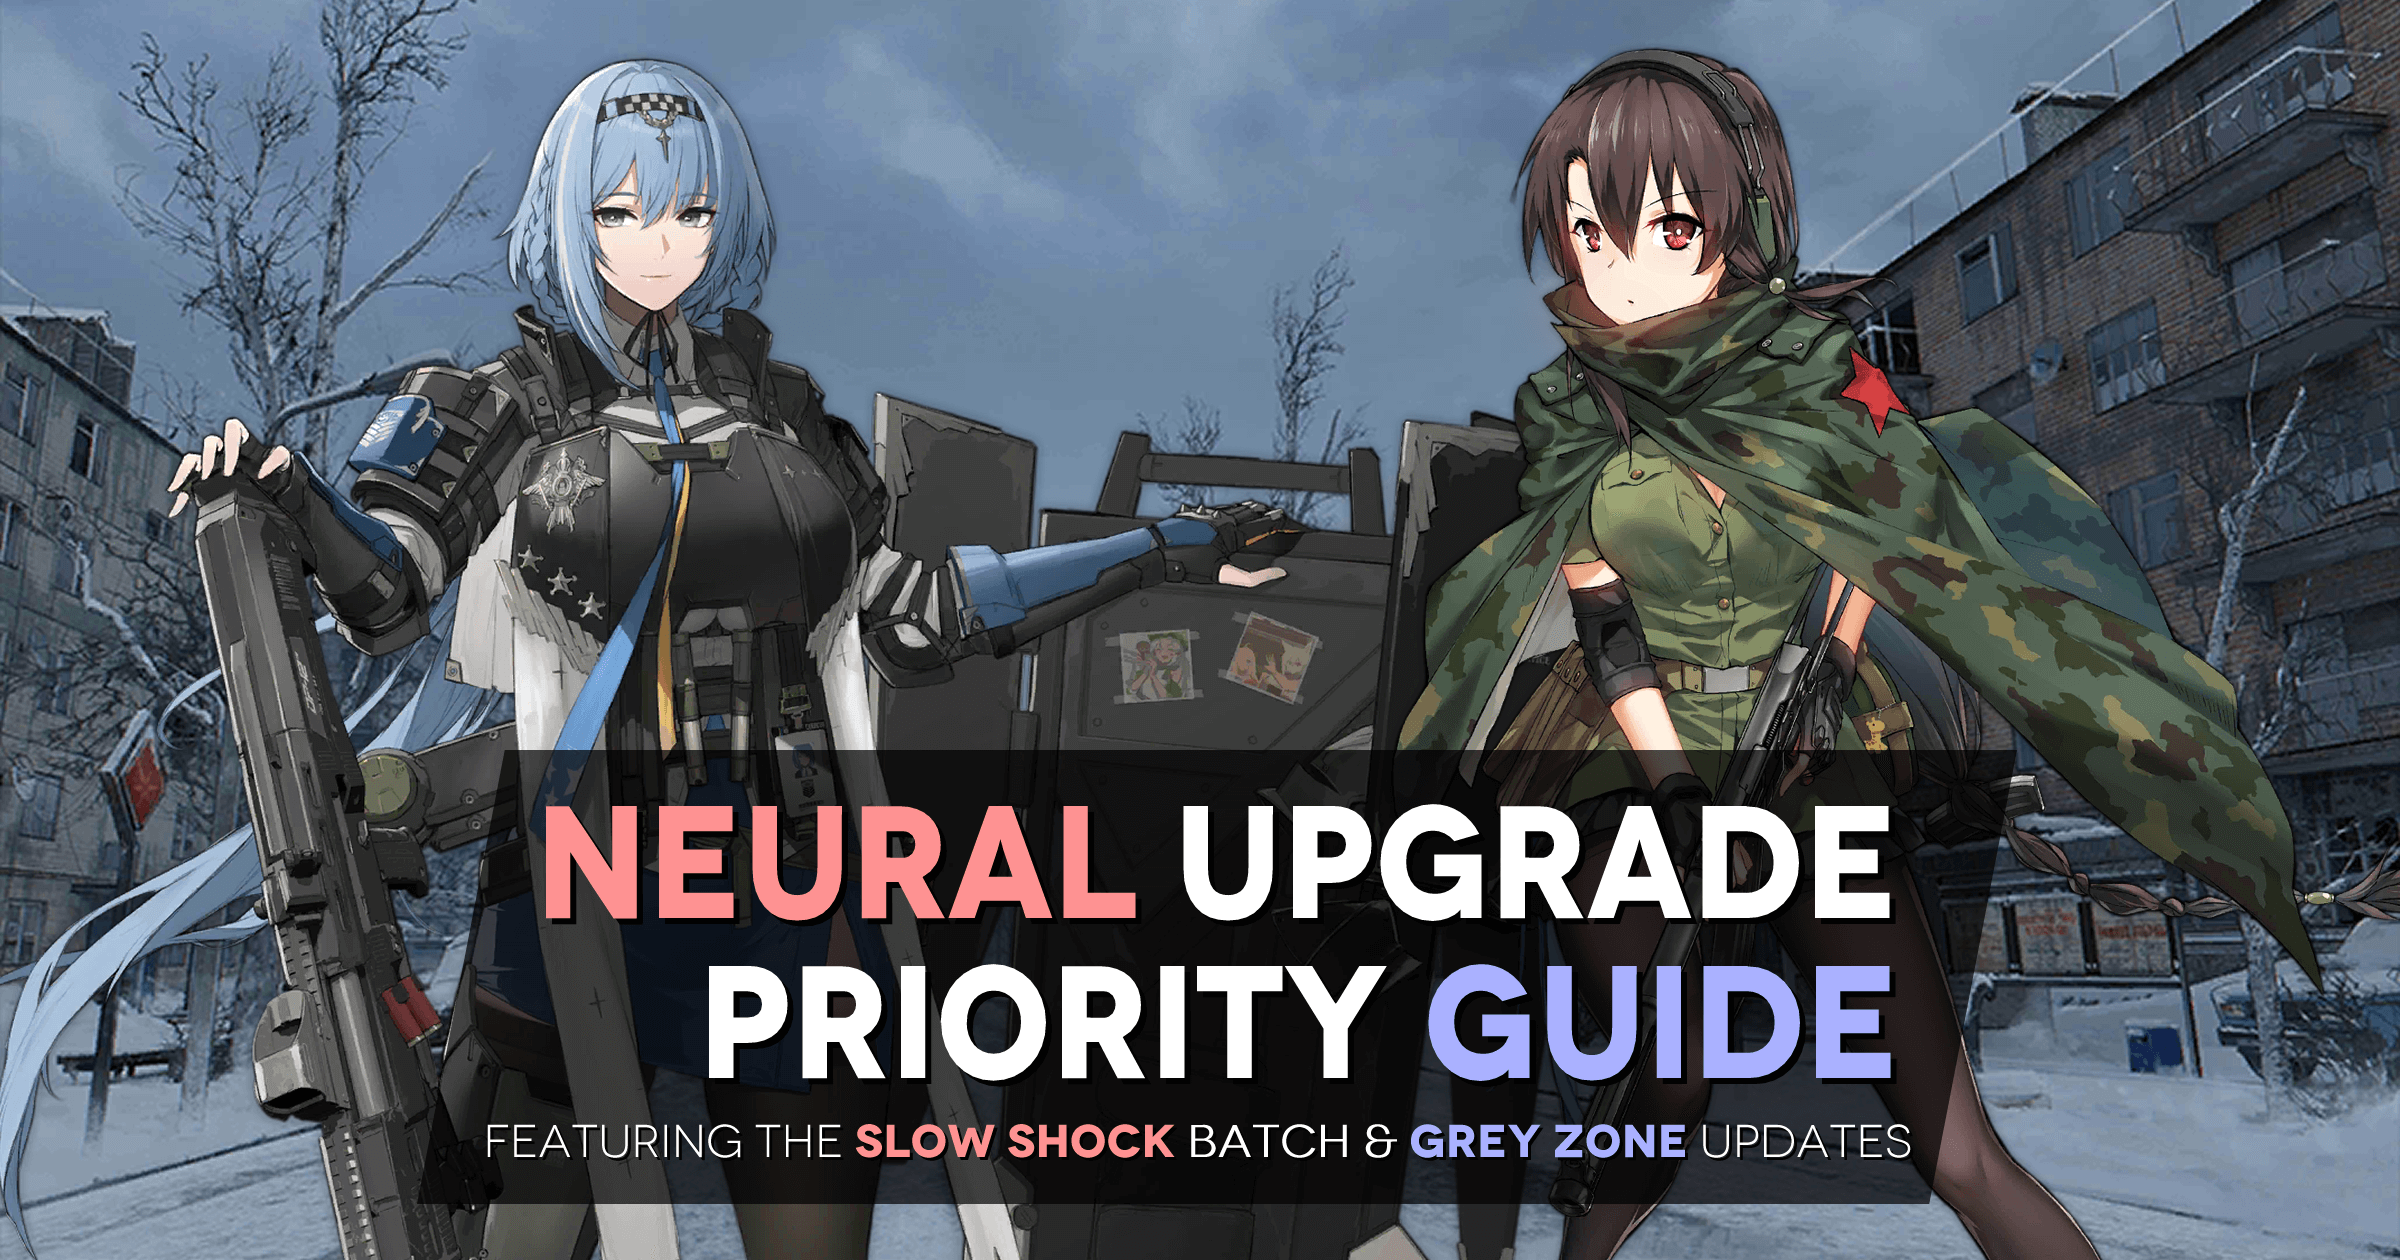 Neural Upgrade Priority Guide featuring the Slow Shock upgrades and Grey Zone updates!